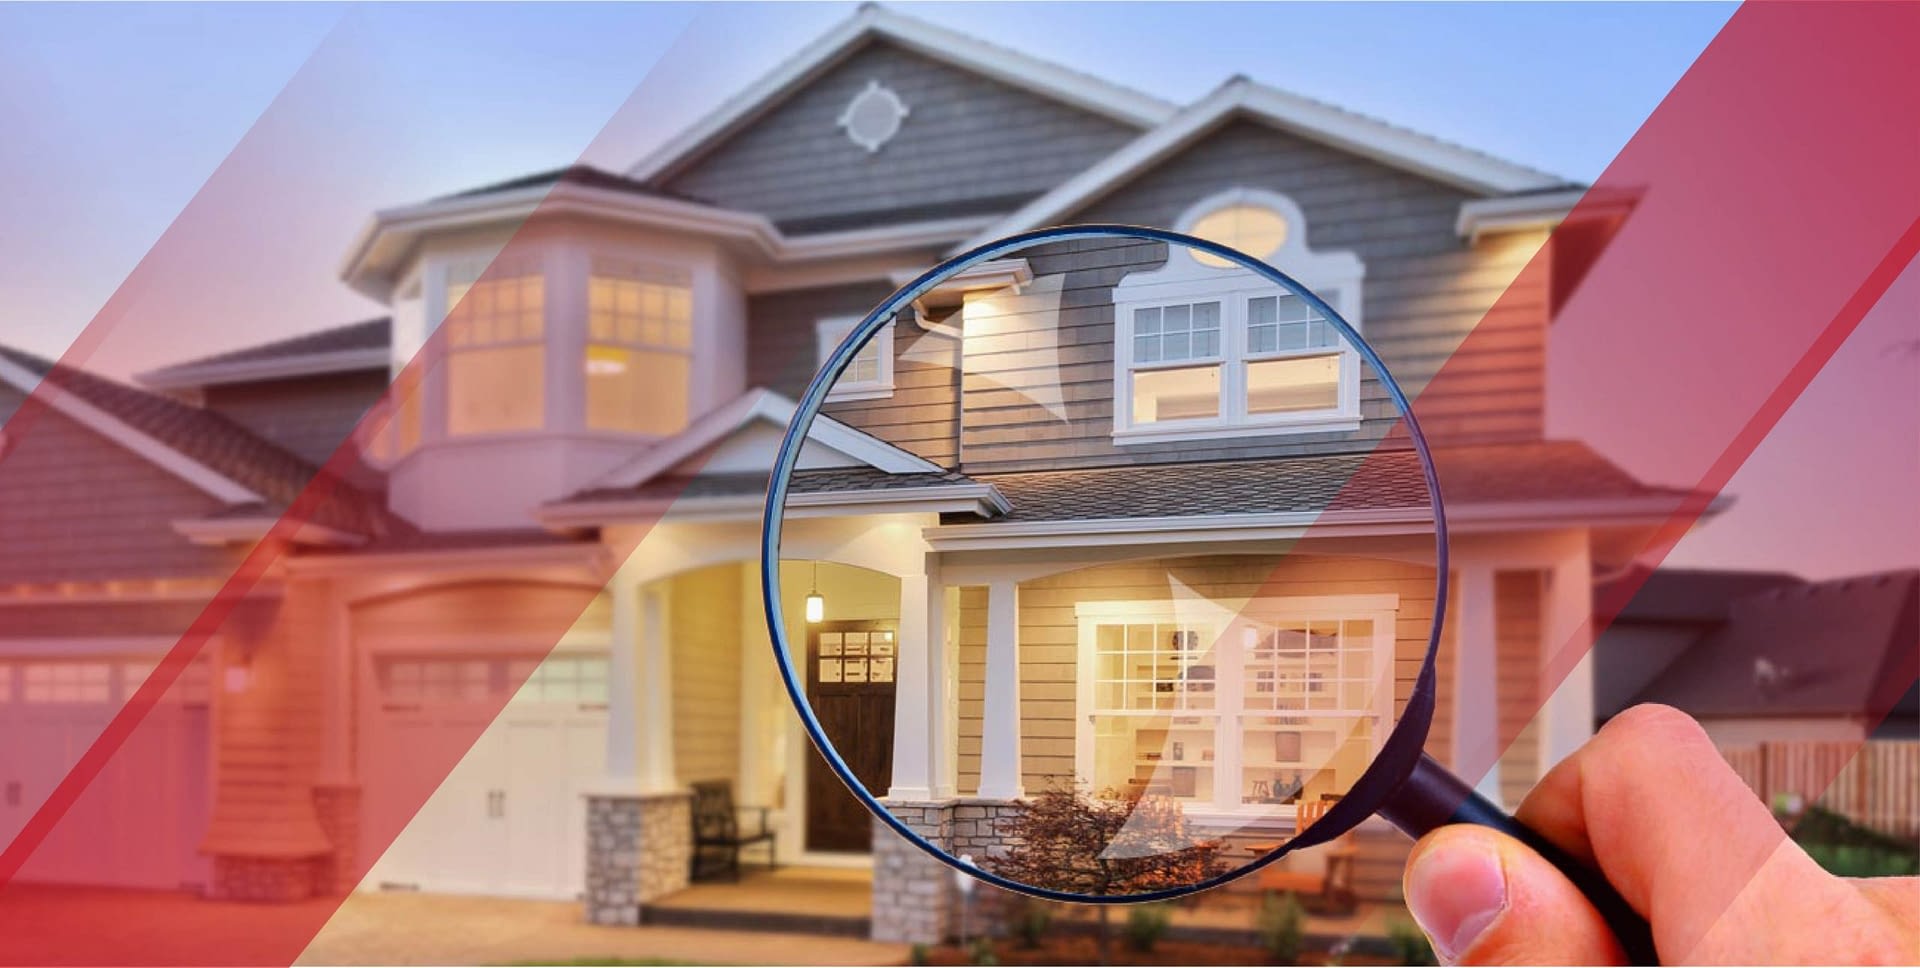 WHAT IS A HOME INSPECTION?